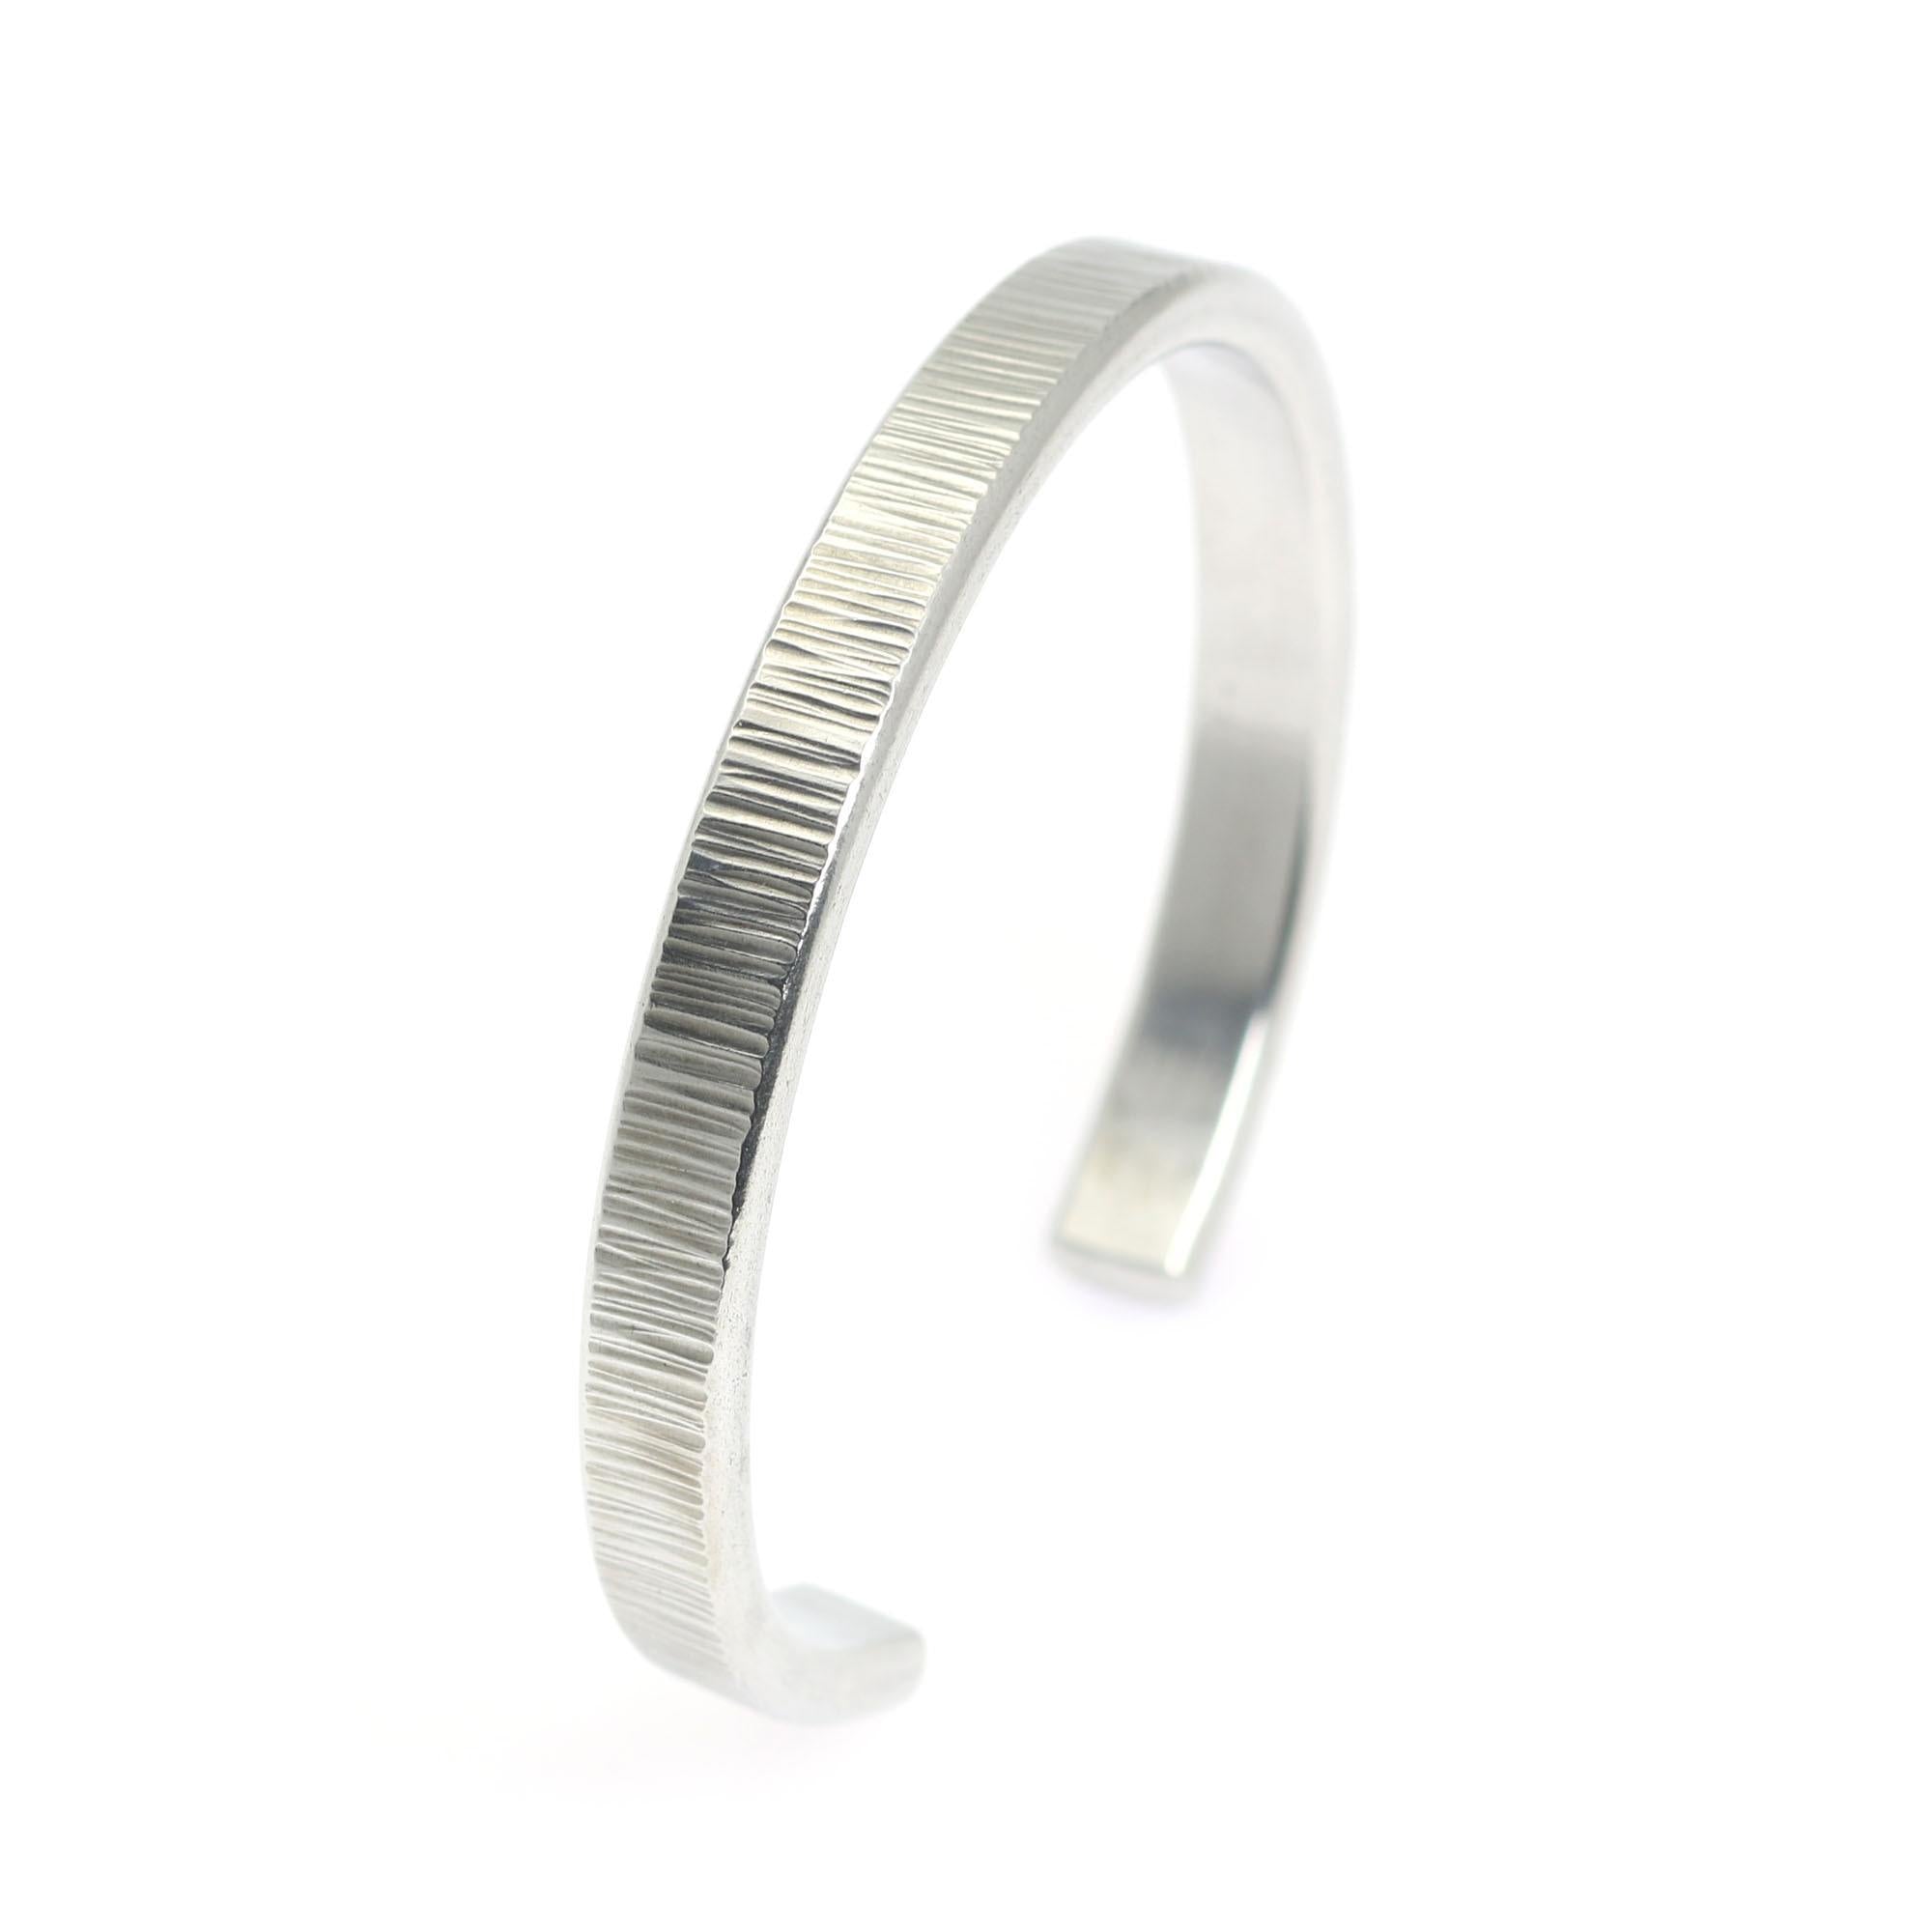 Left View of Thin Chased Aluminum Cuff Bracelet